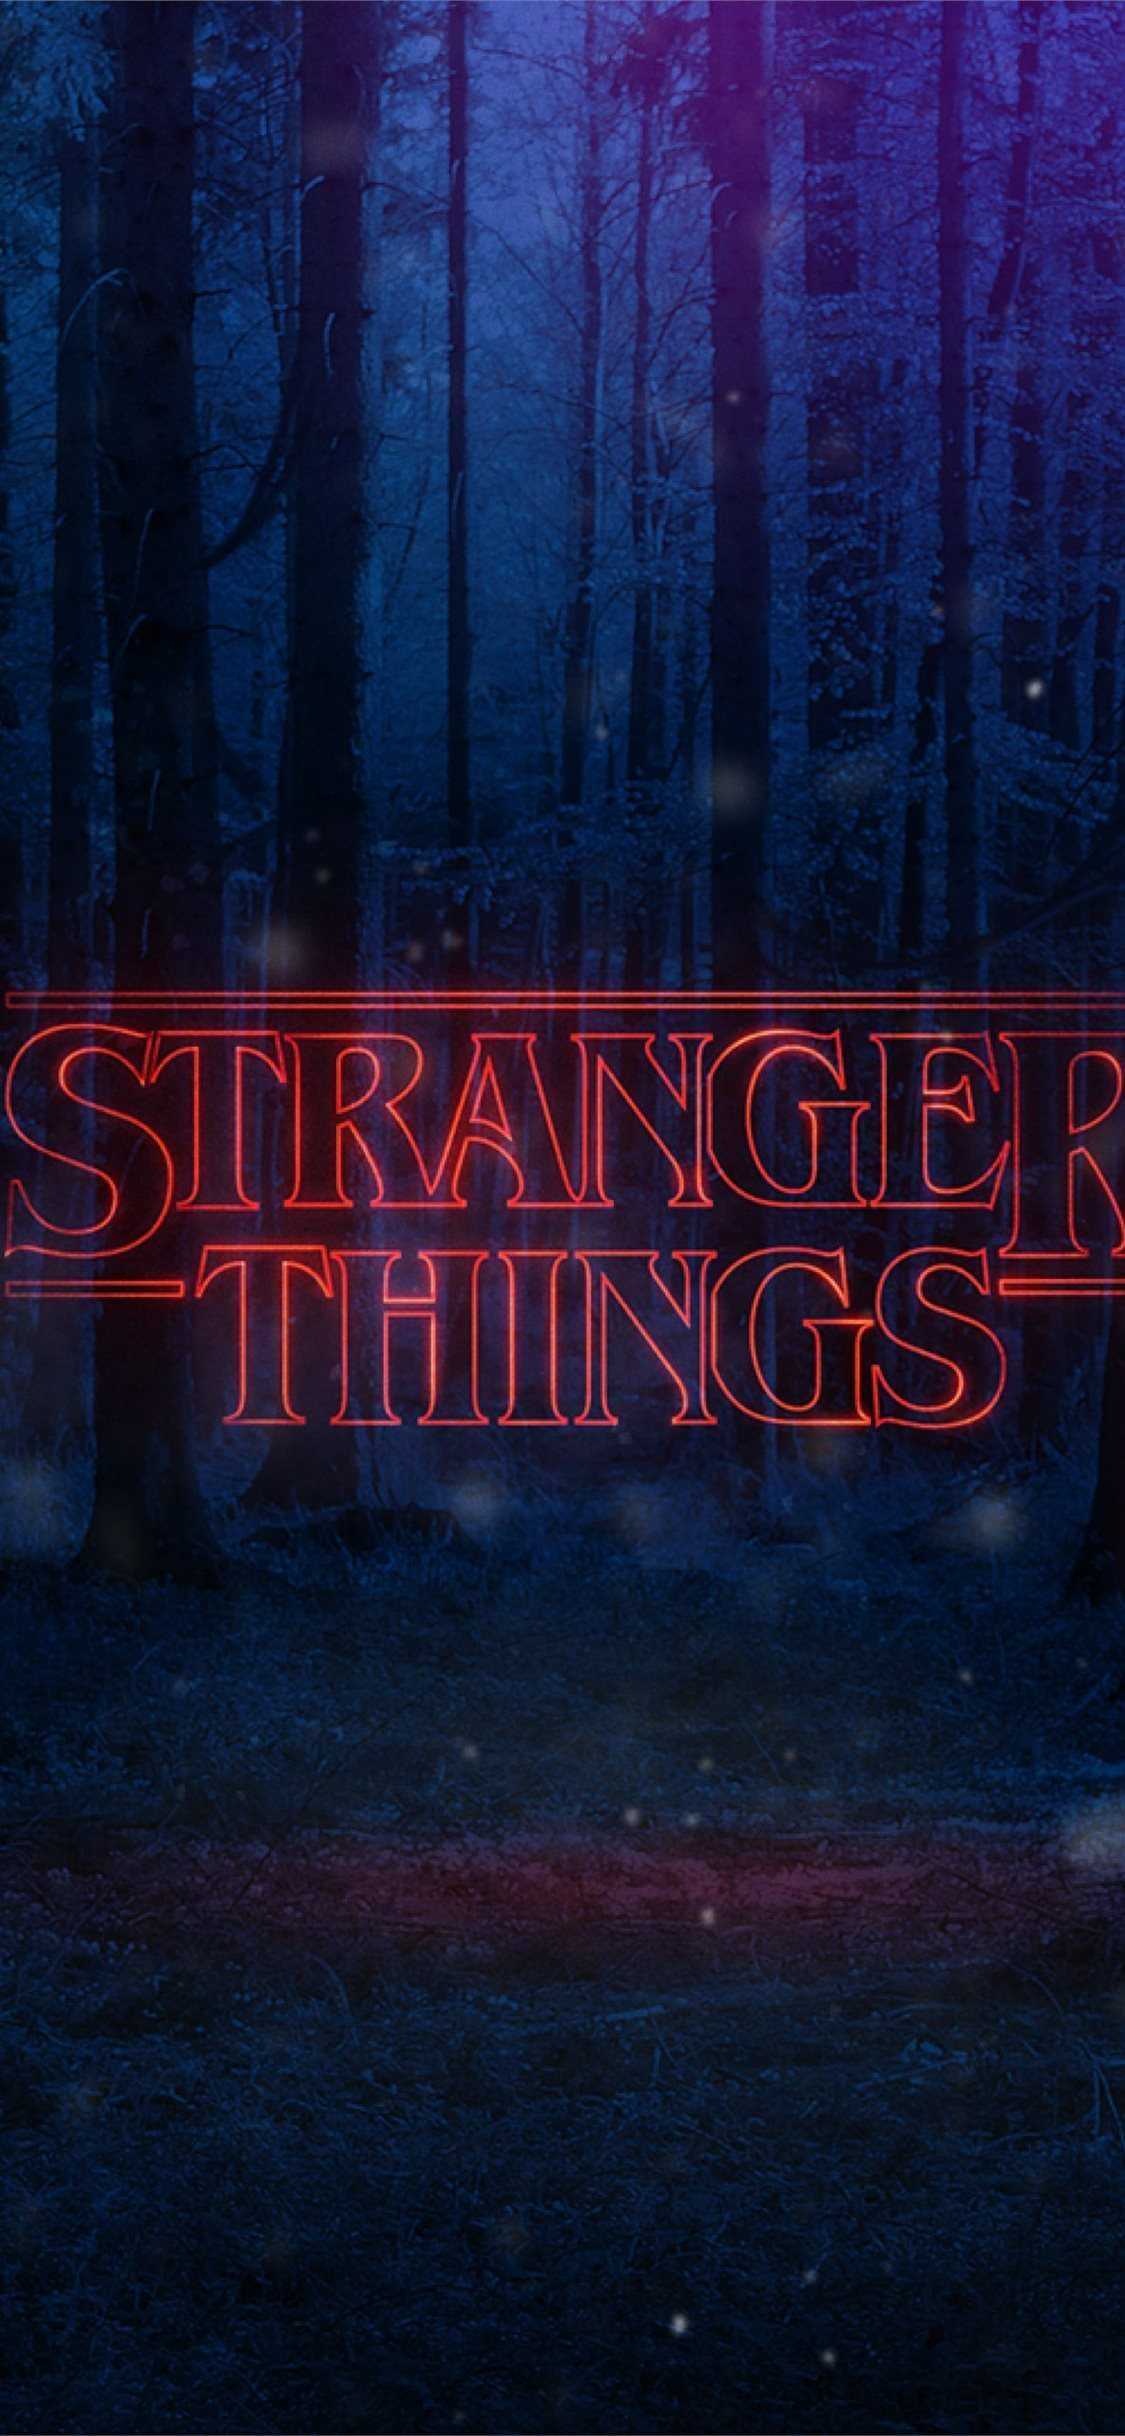 Stranger Things: The series has been nominated for 13 Saturn Awards, with four wins. 1130x2440 HD Background.